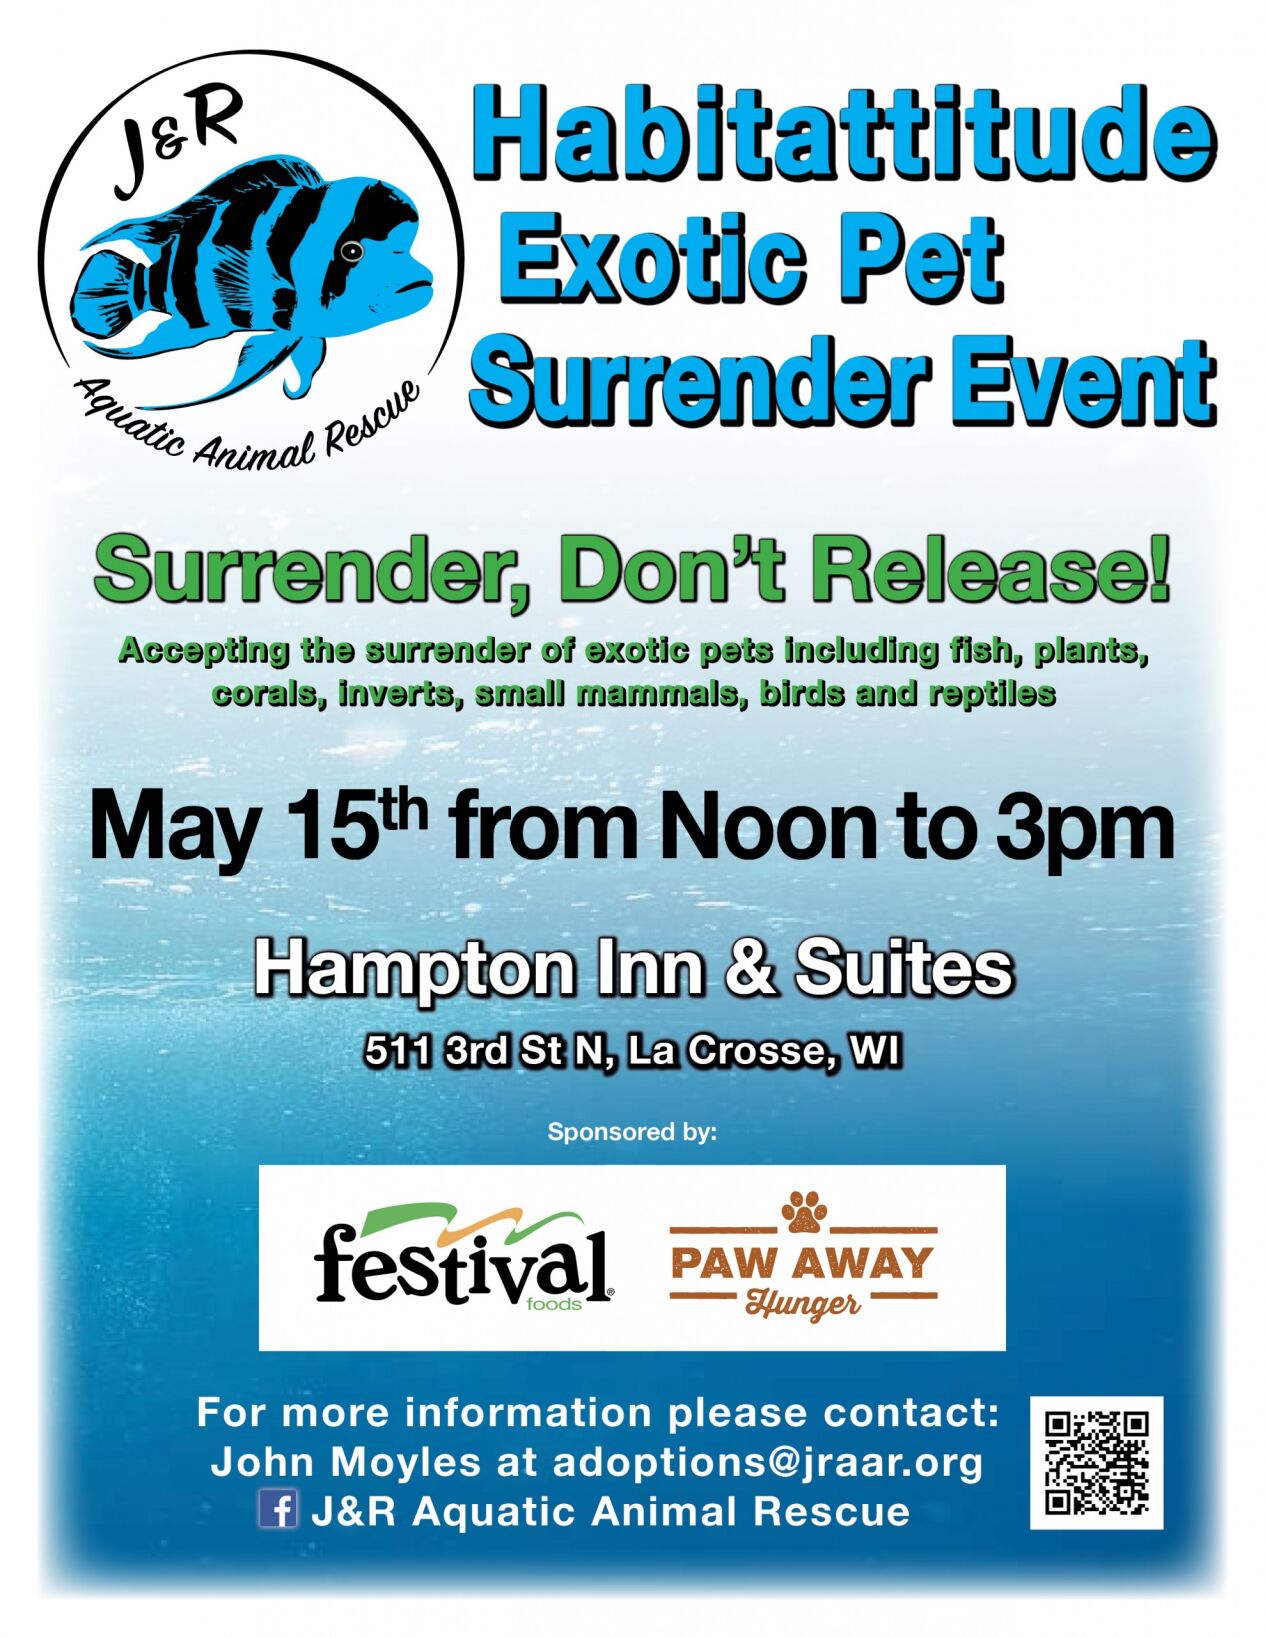 Exotic pet surrender event in La Crosse aims to help people and animals |  Entertainment 